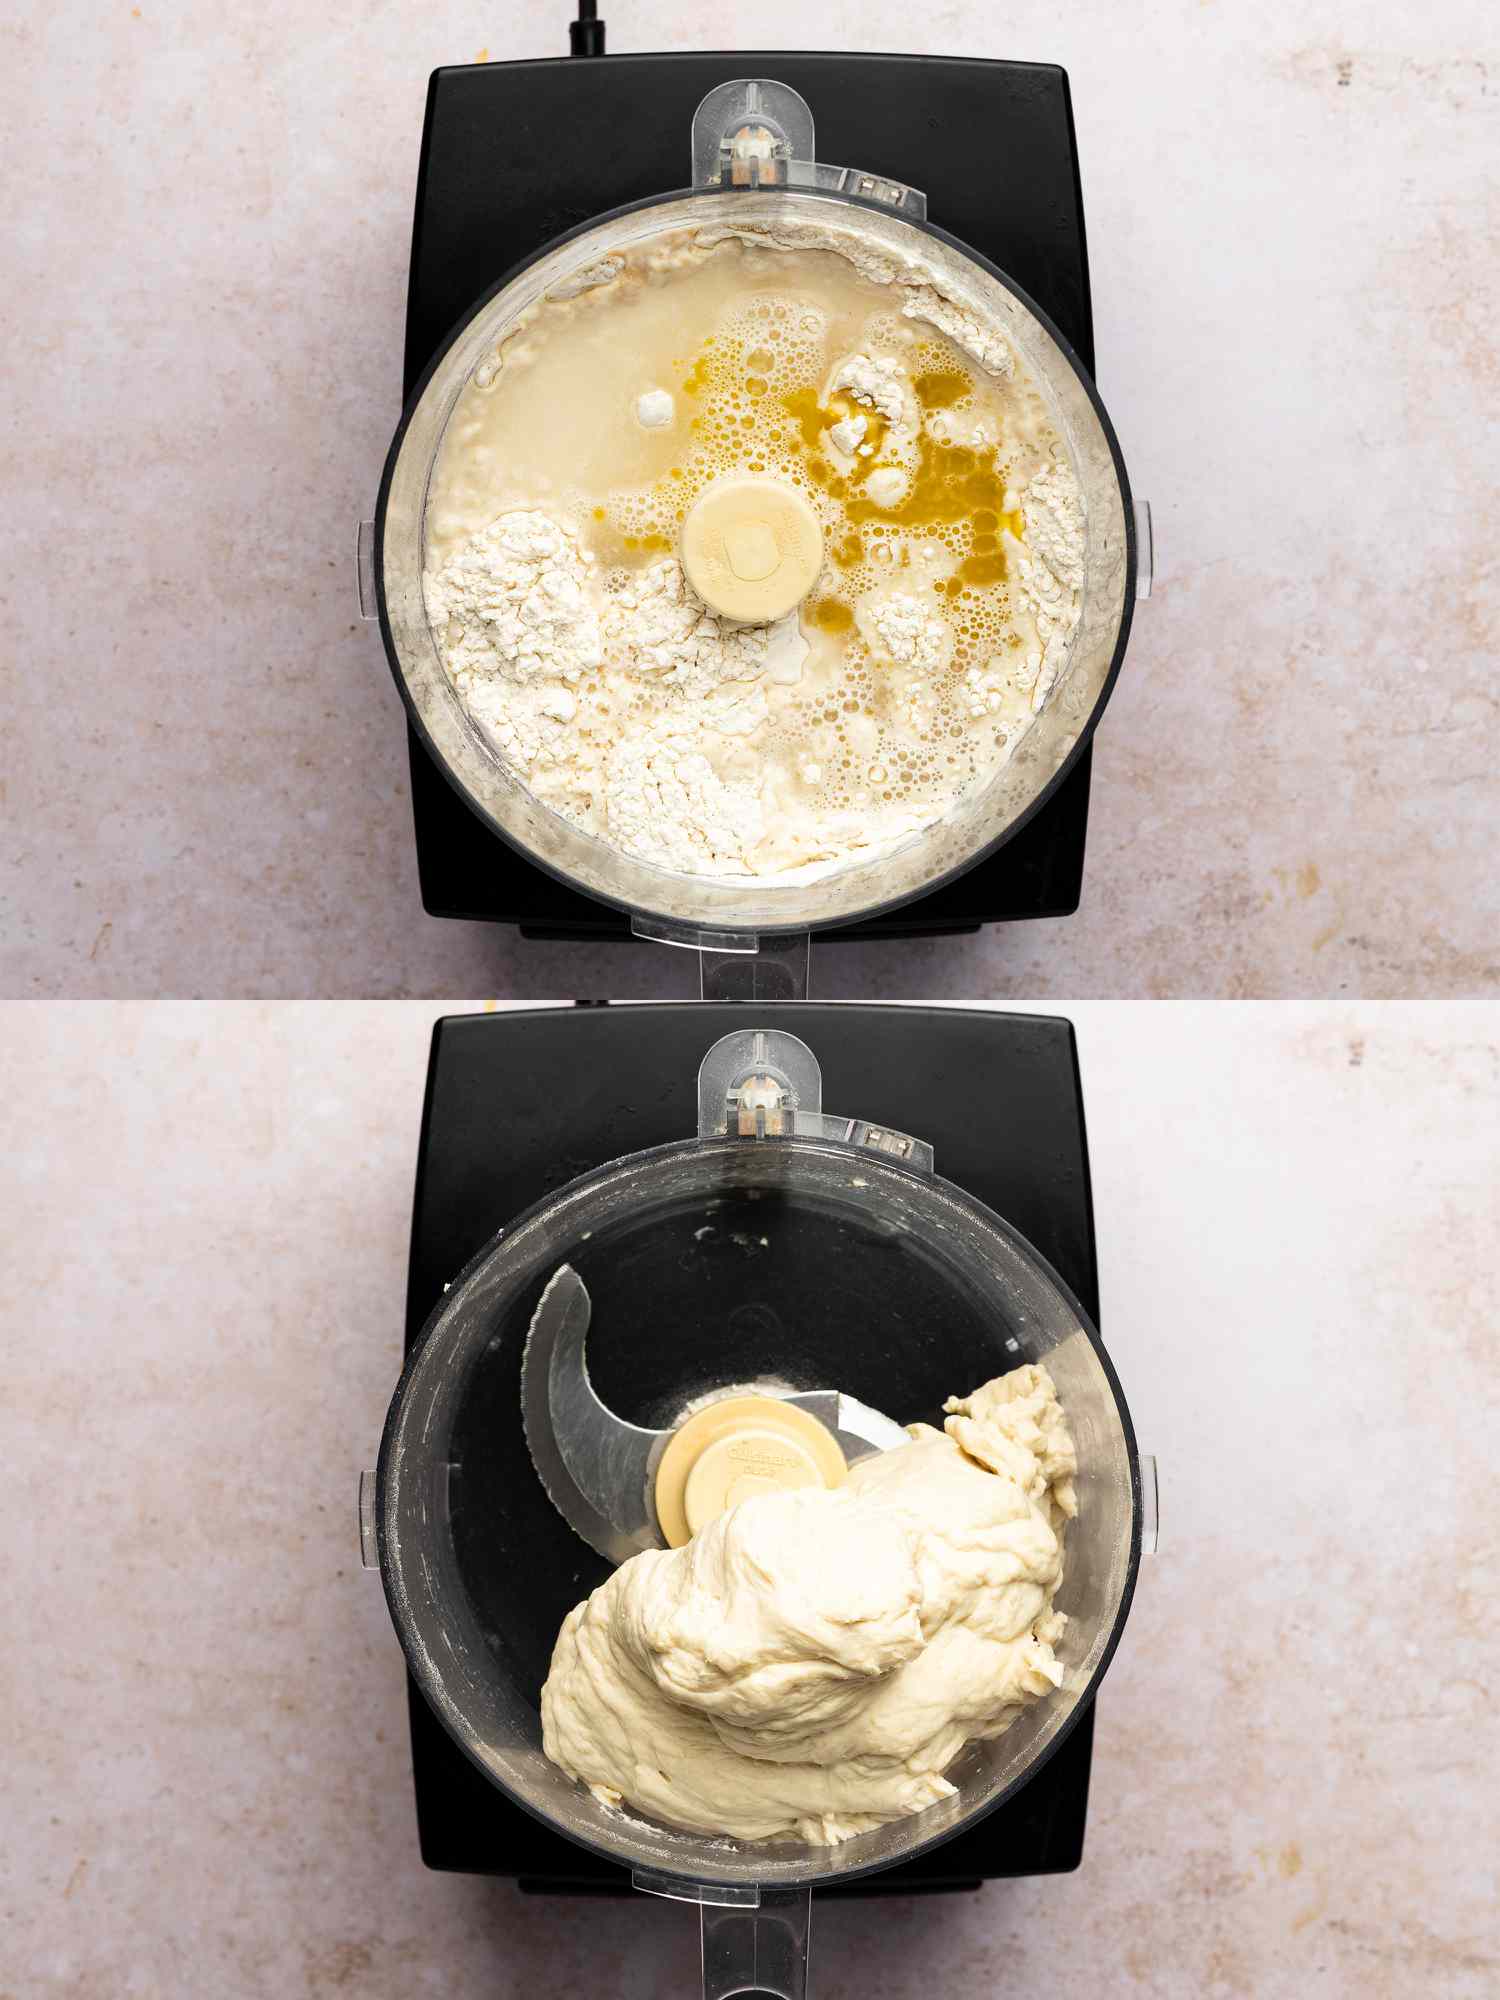 Olive oil and water added to combined flour, sugar, salt, and yeast in food processor bowl